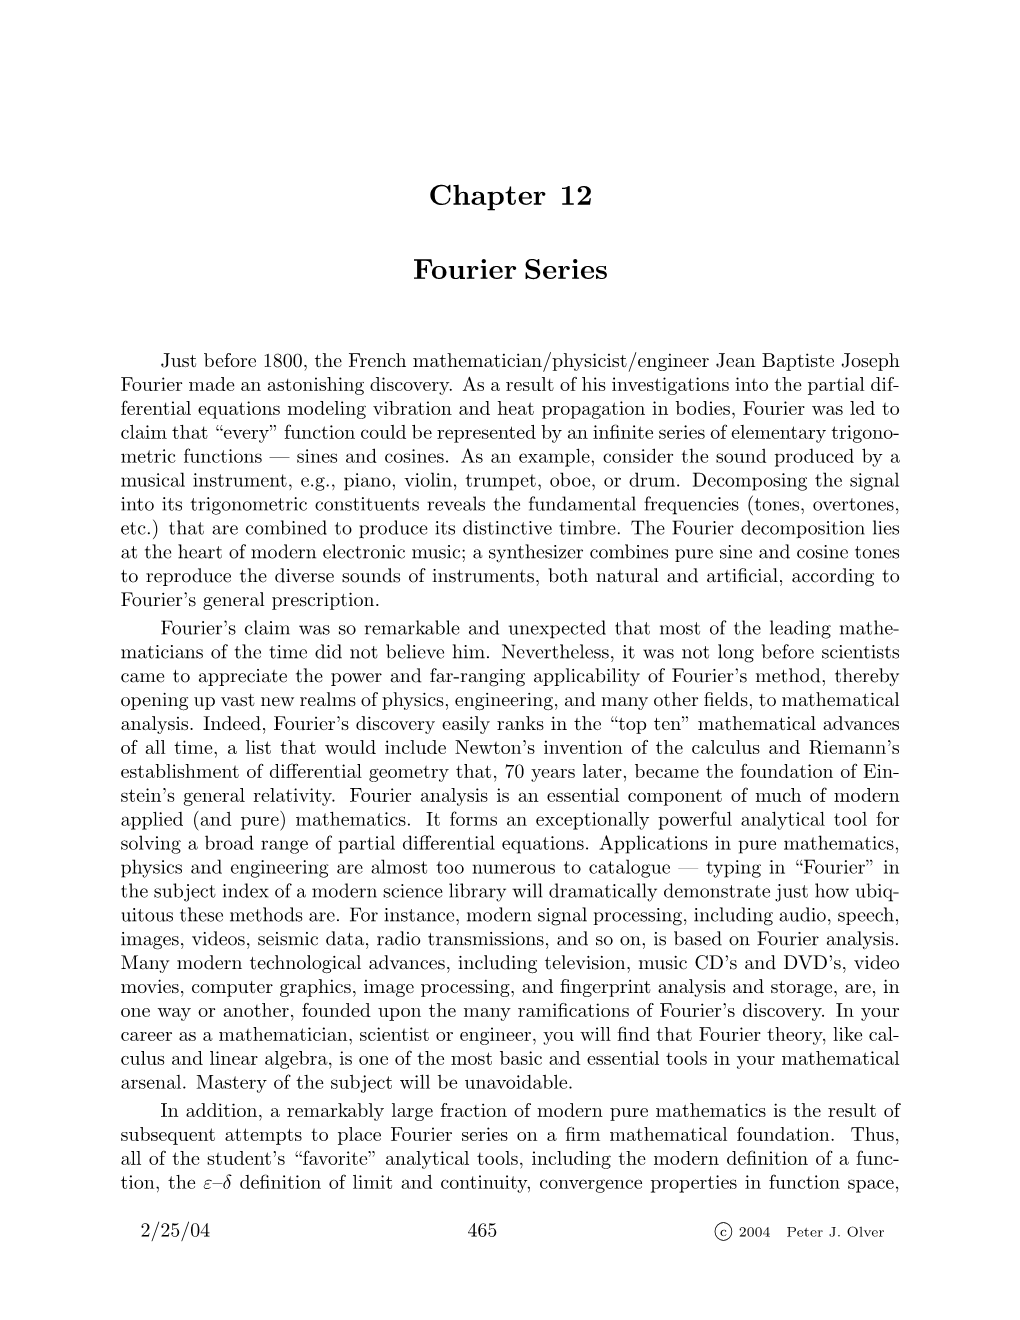 Chapter 12 Fourier Series